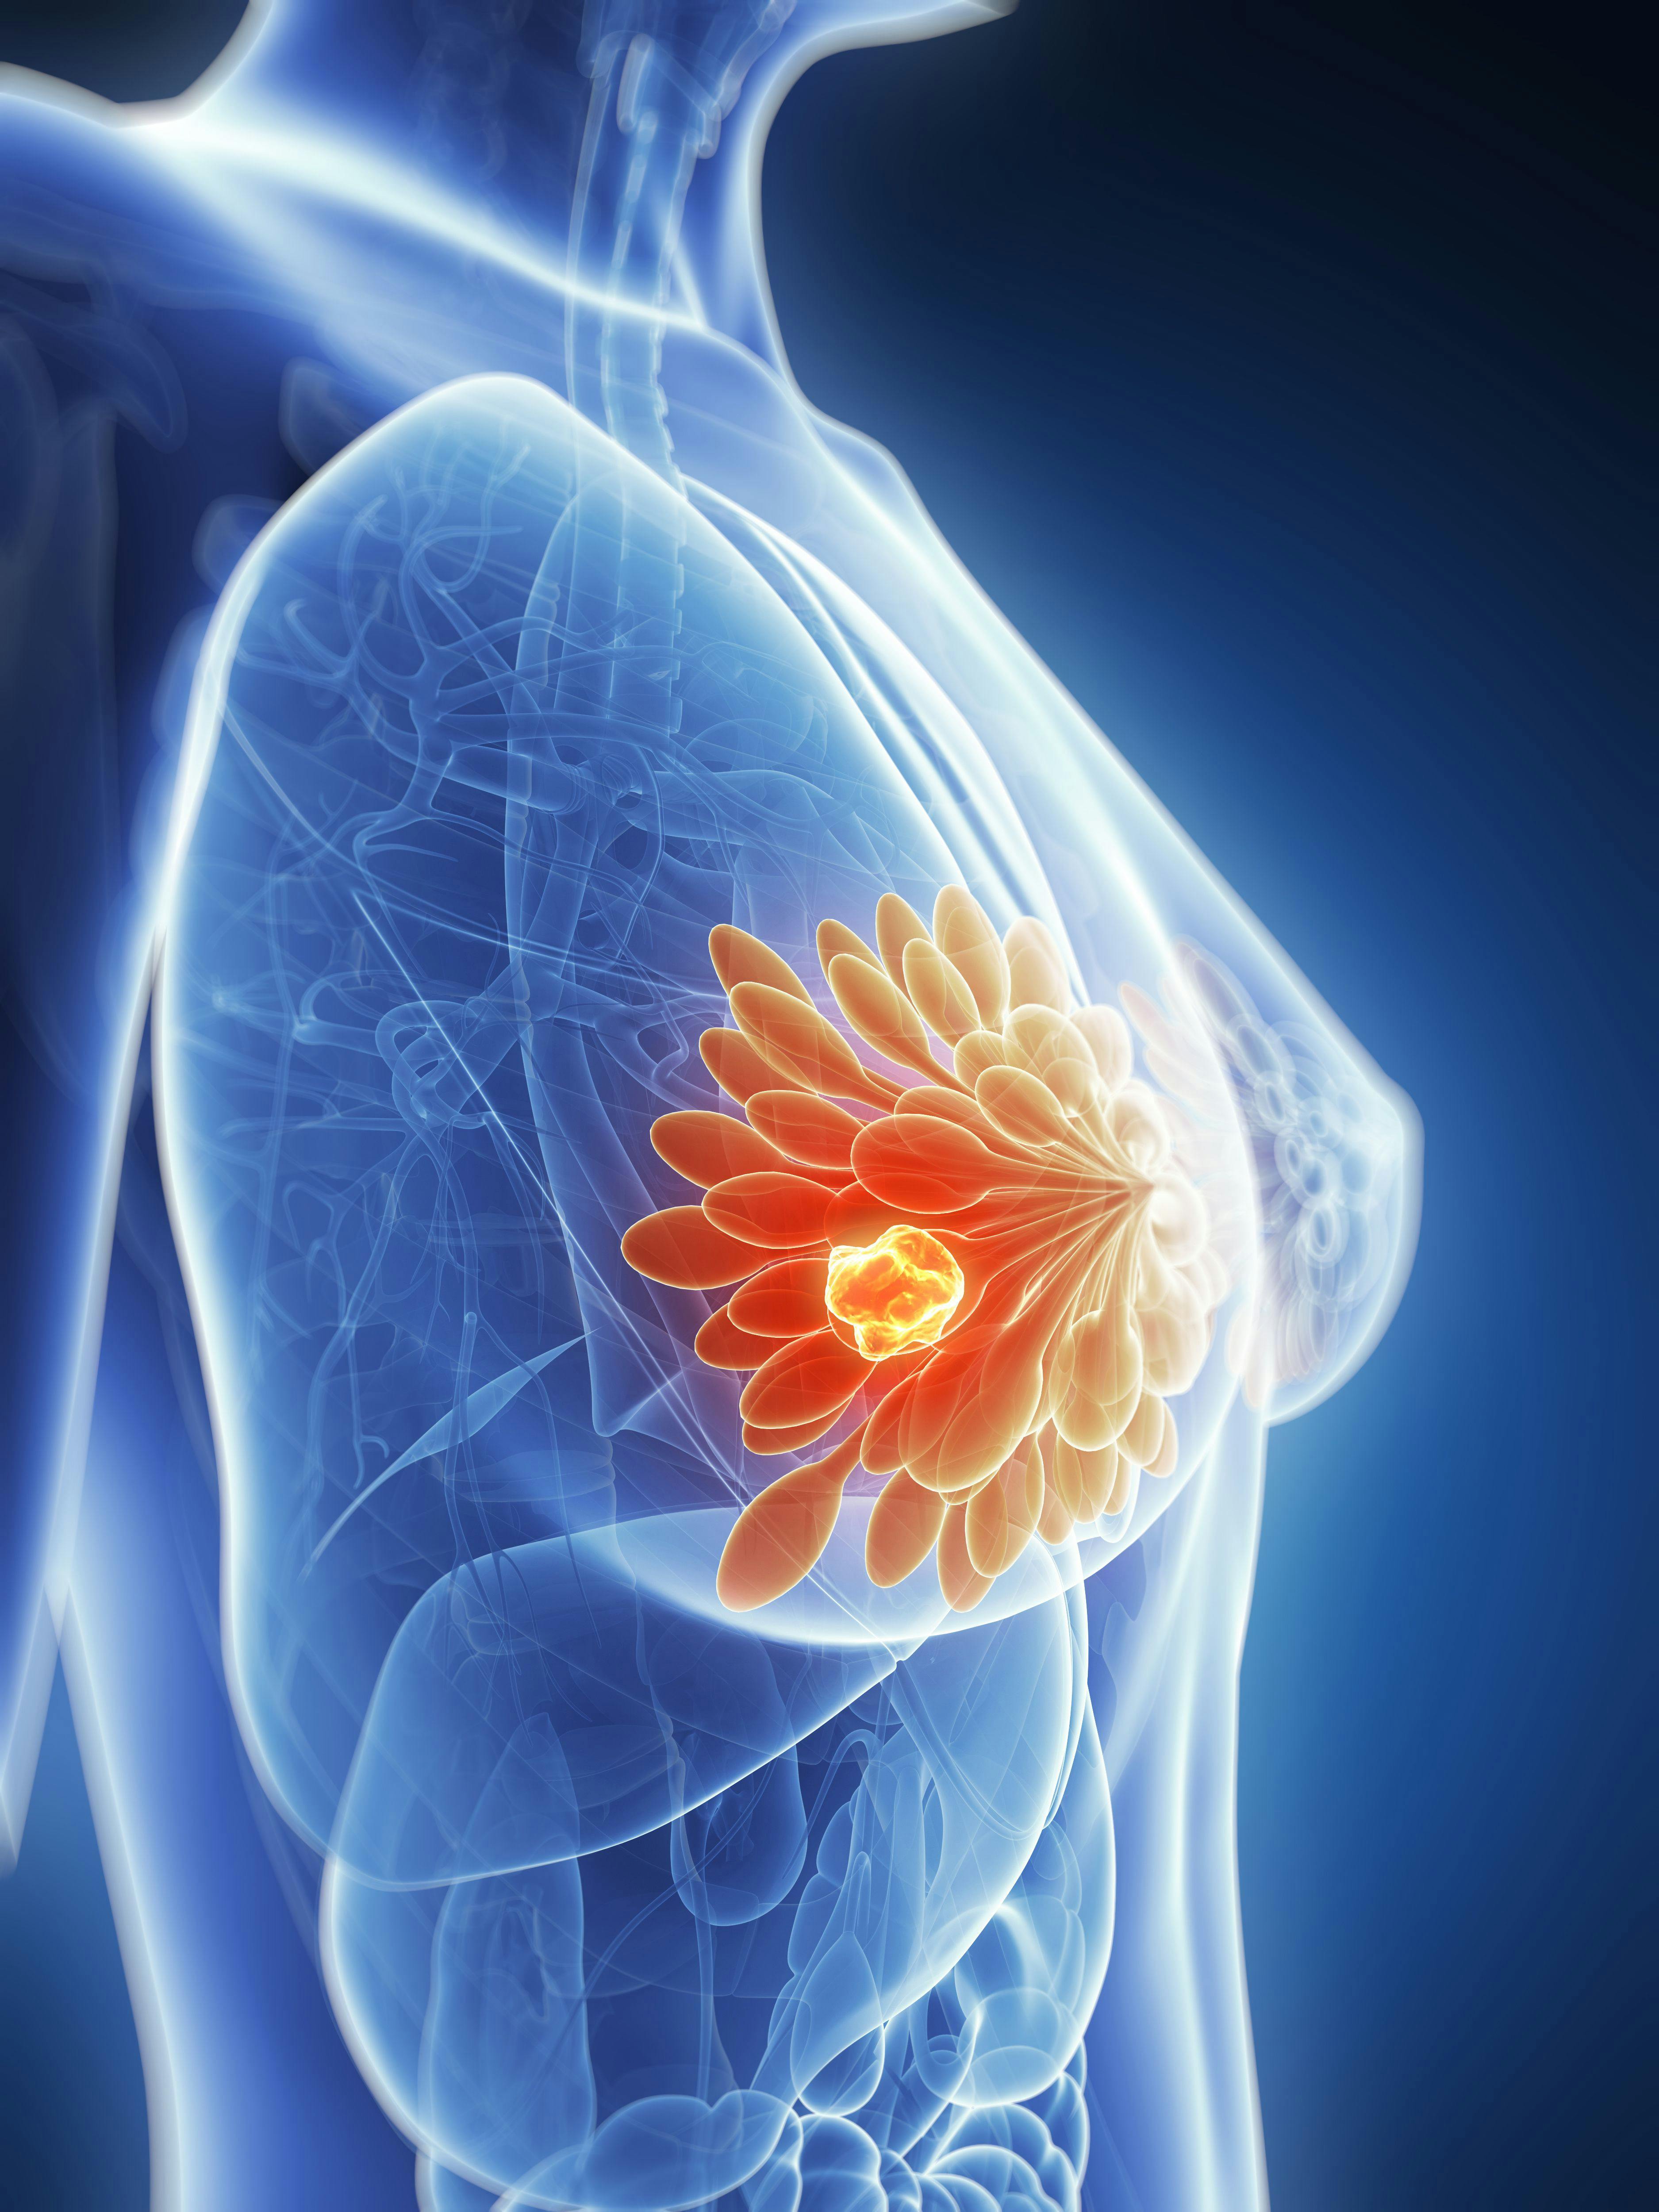 Findings from a meta-analysis indicated that pathologic complete response is a notable predictor of outcomes in HER2-positive breast cancer.